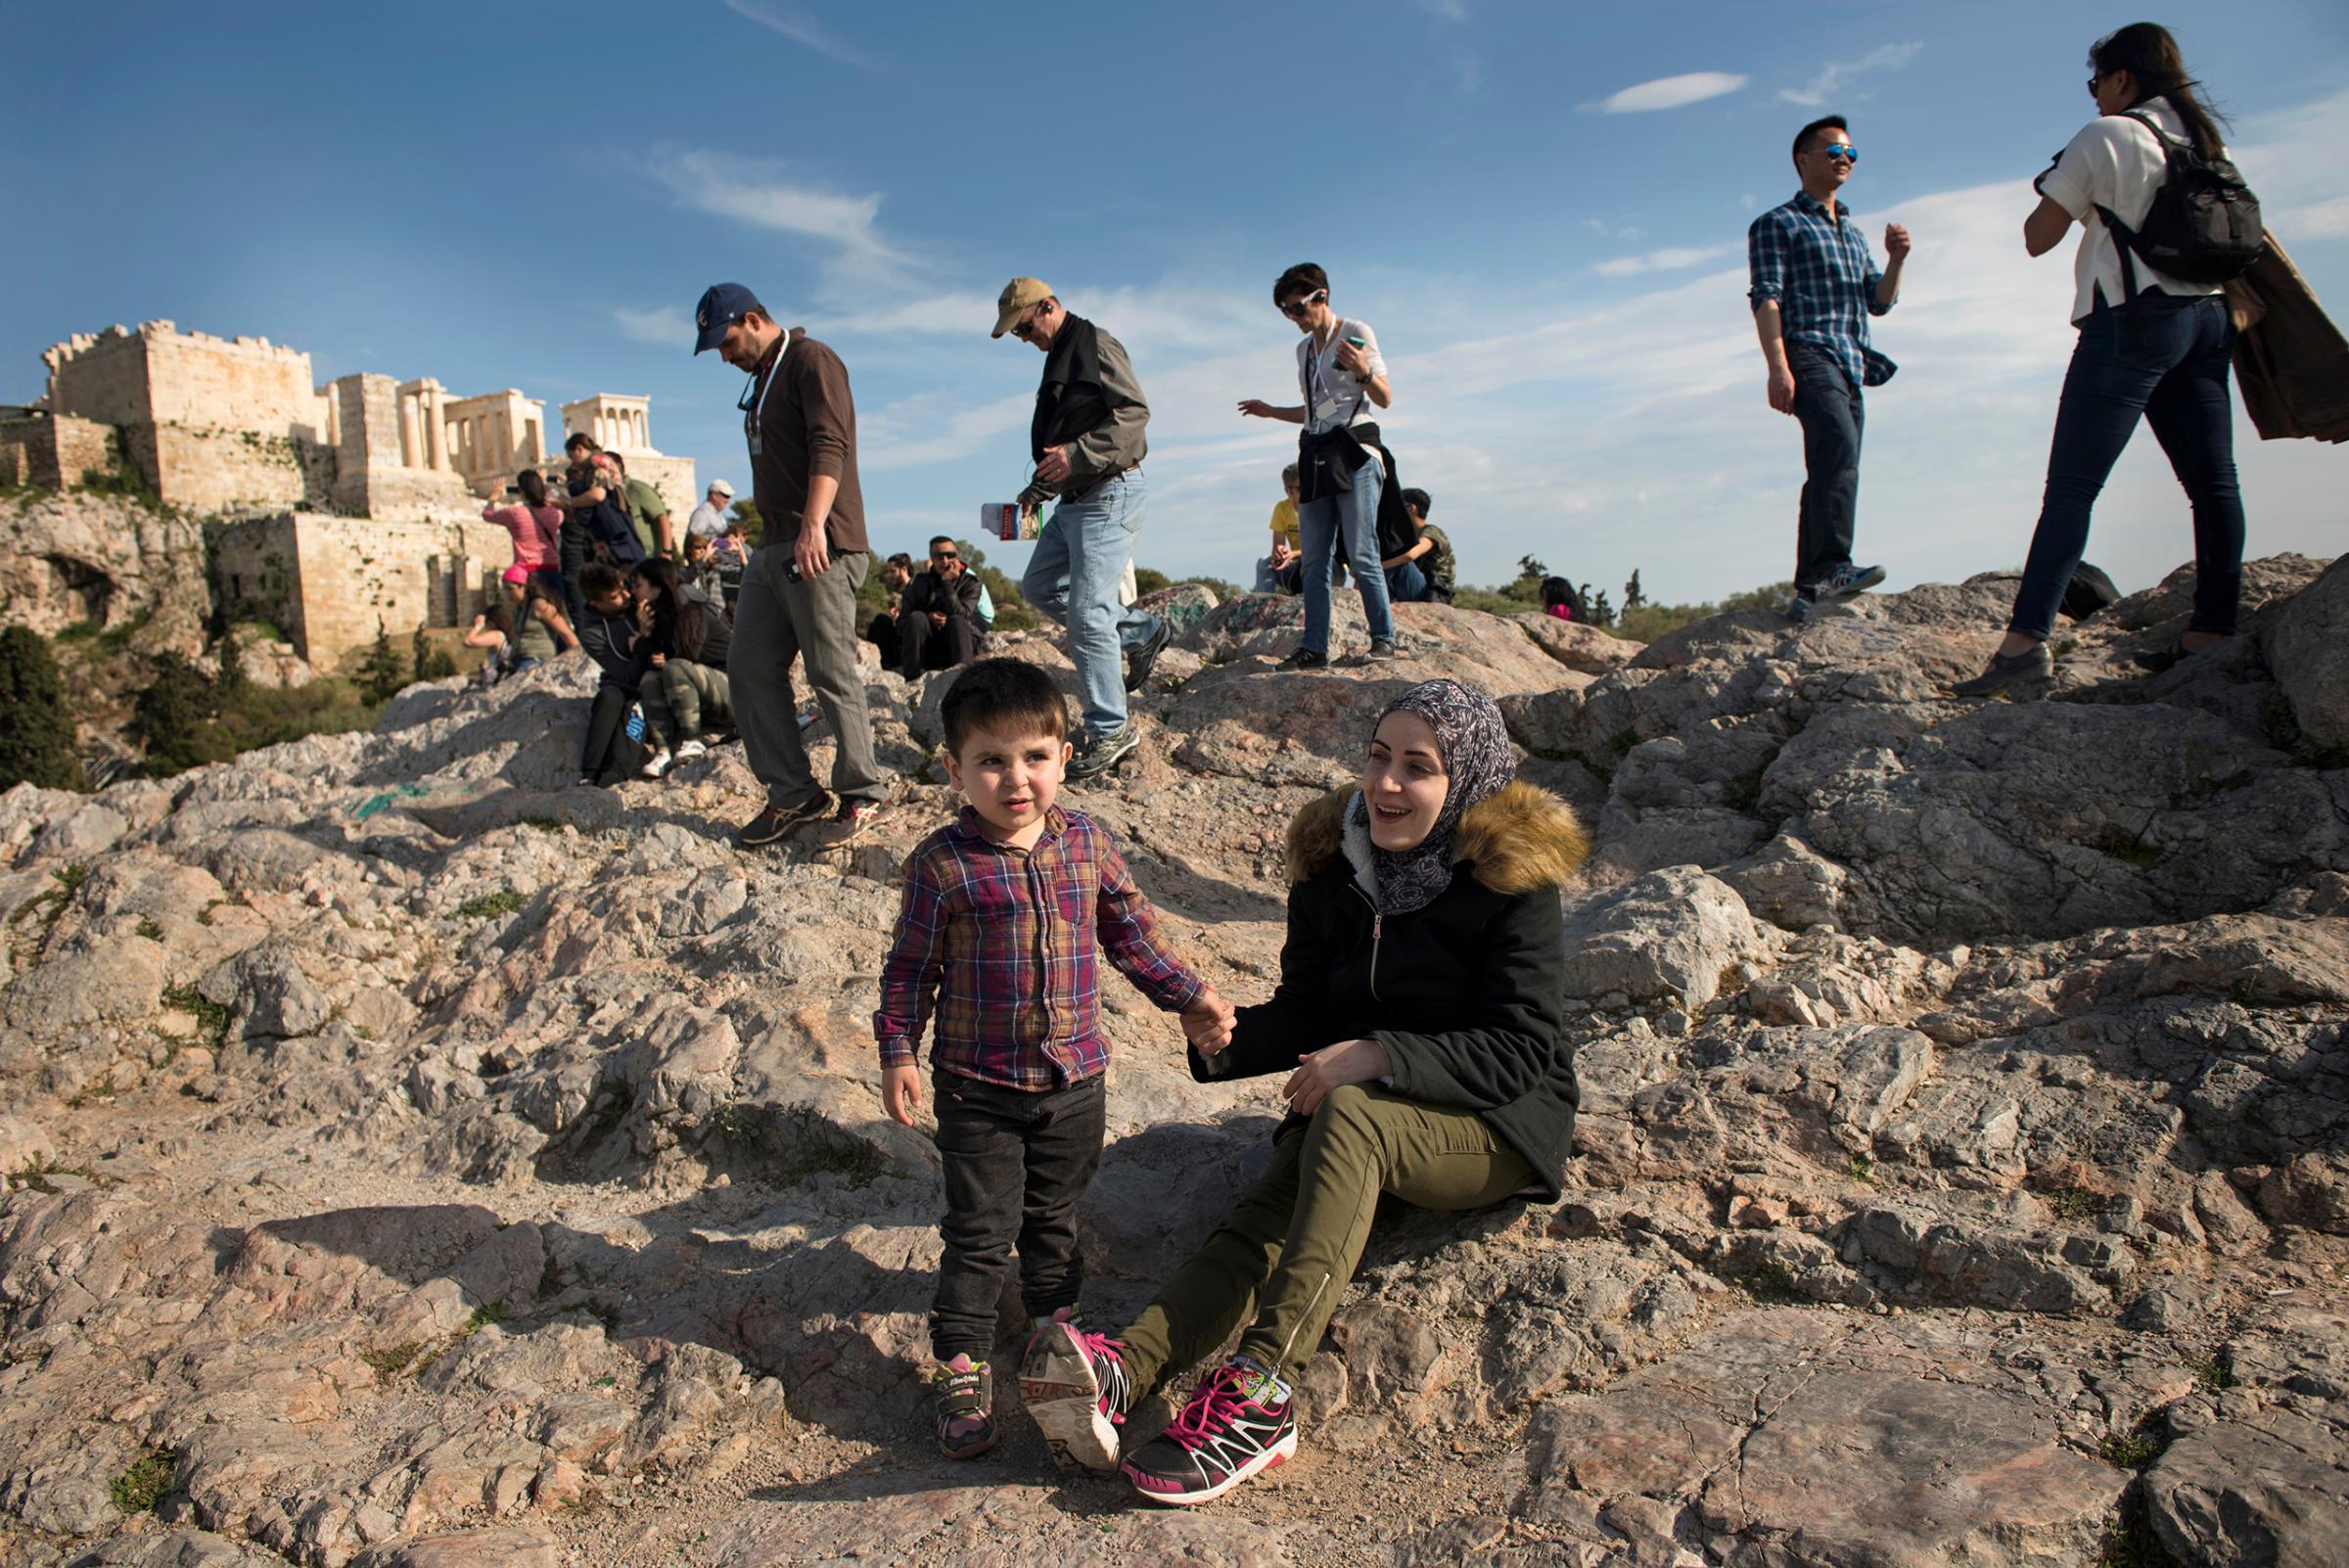 Syrian refugees Taima and her 3 year old son, Wael, walk around the Acropolis in Athens, Greece, March 30, 2017.